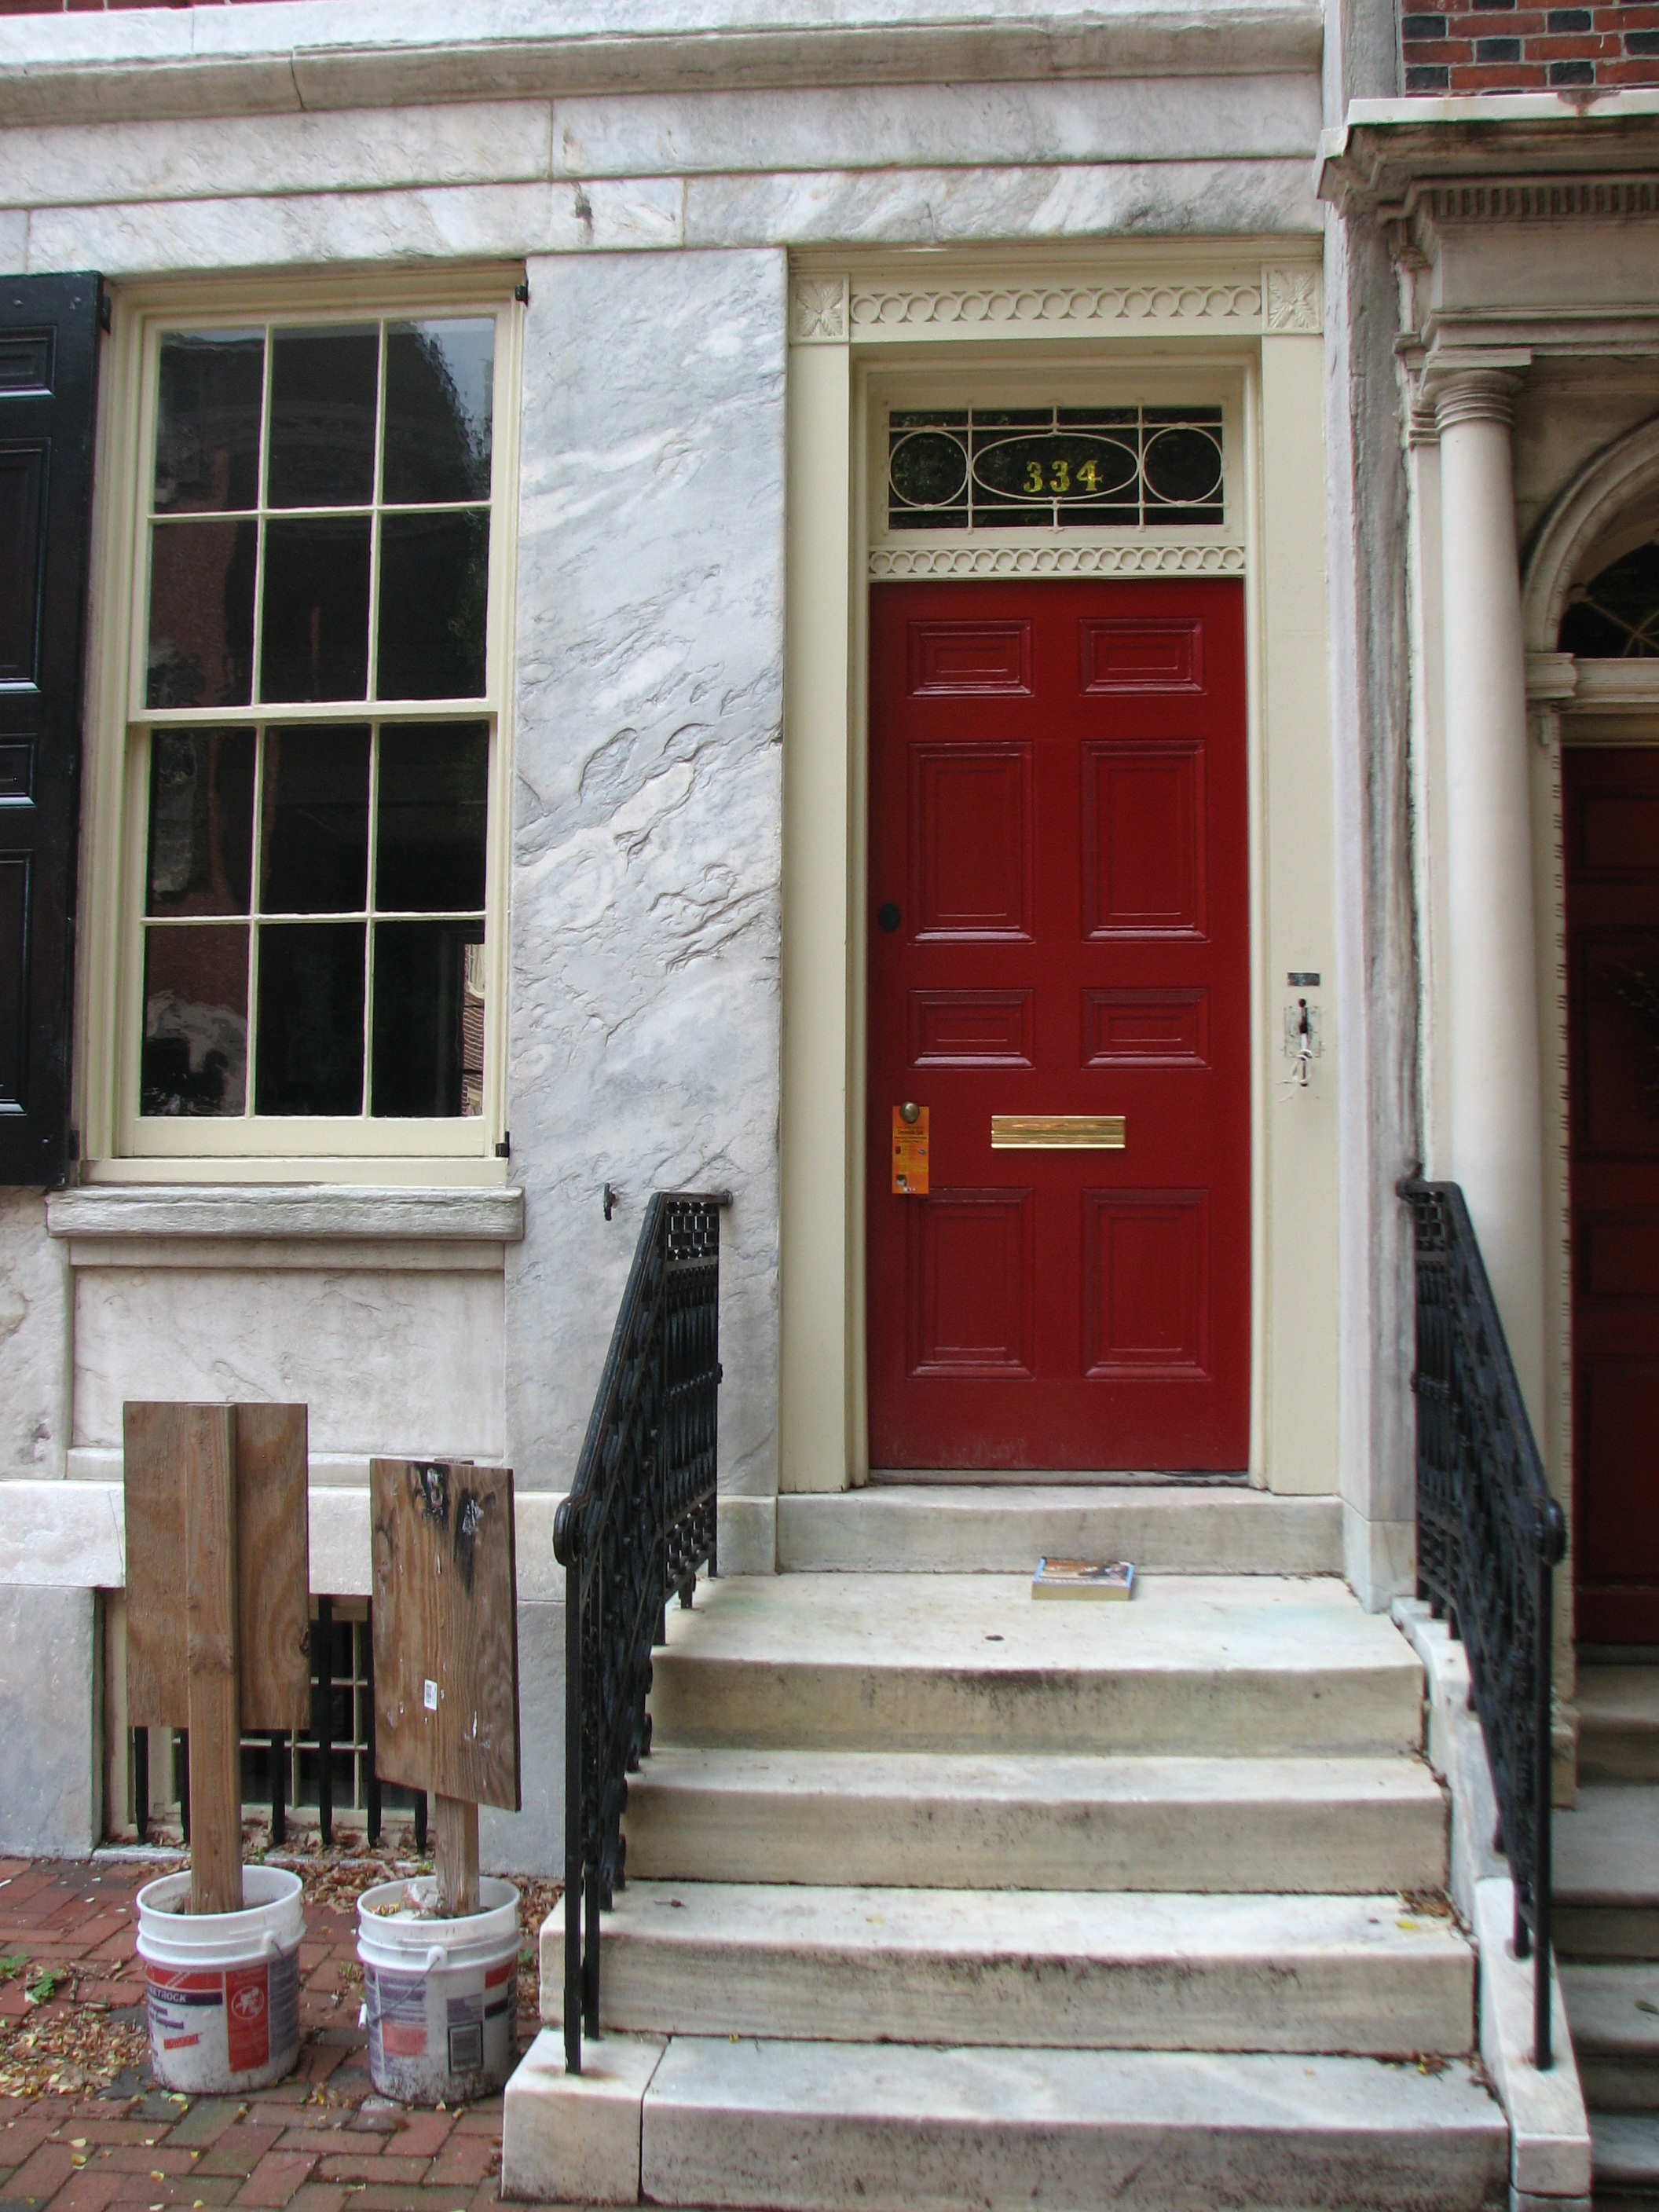 The entrance to one of the Girard Row homes.